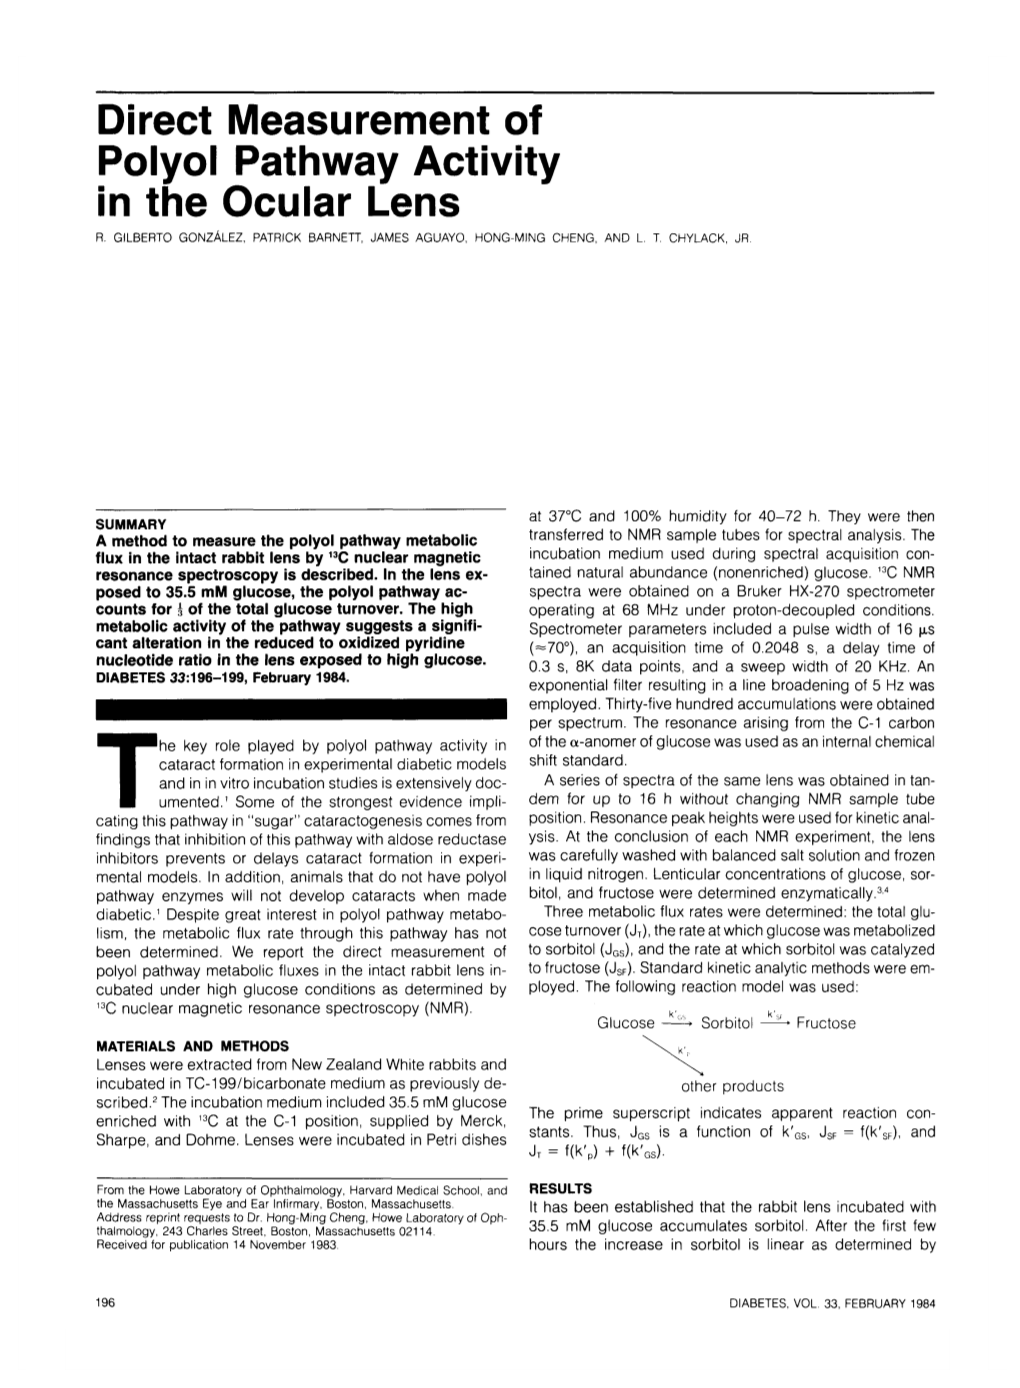 Direct Measurement of Polyol Pathway Activity in the Ocular Lens R